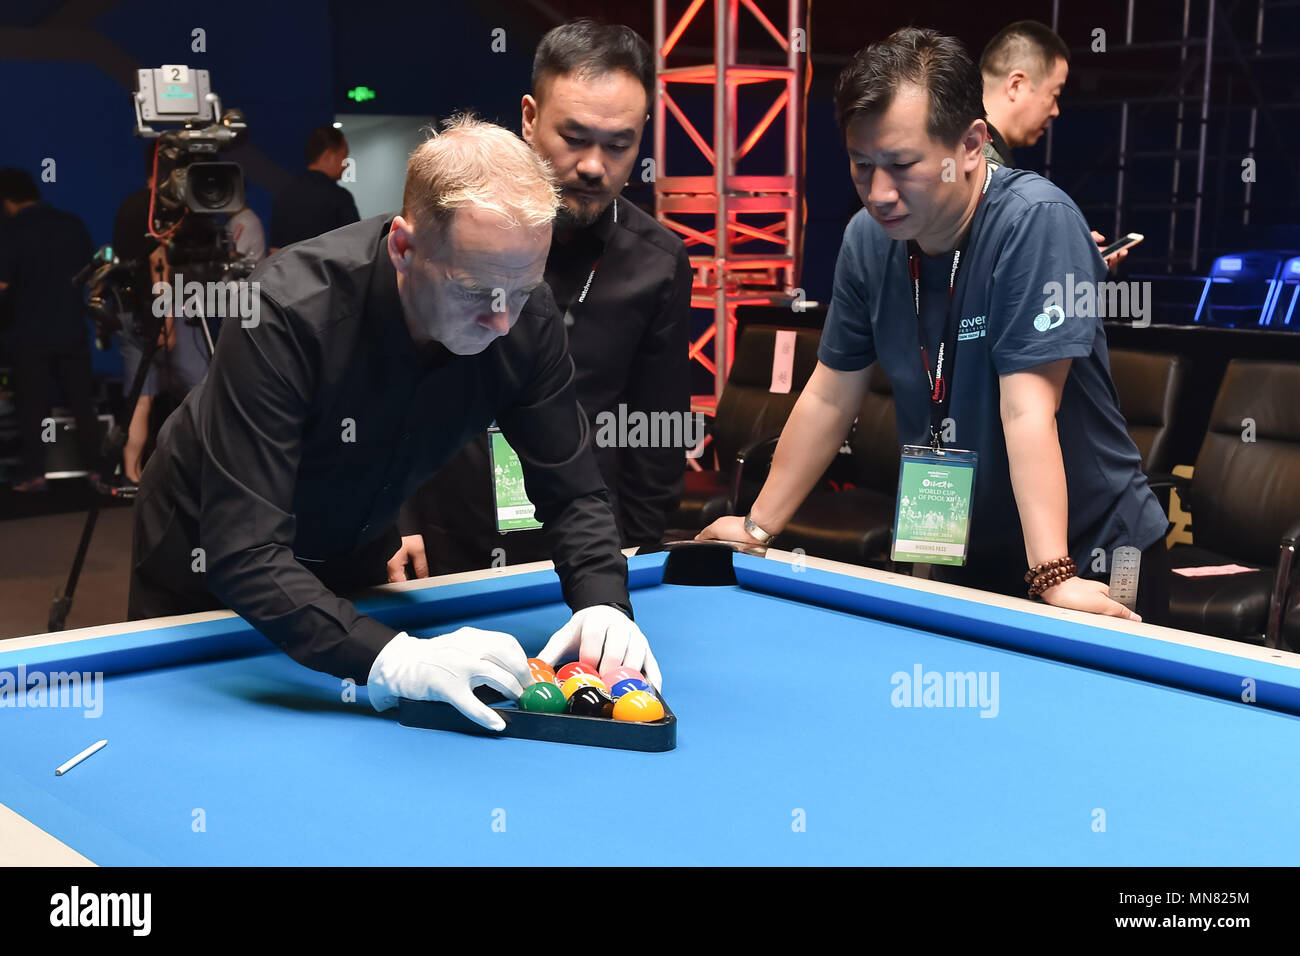 Pool Table China High Resolution Stock Photography and Images - Alamy